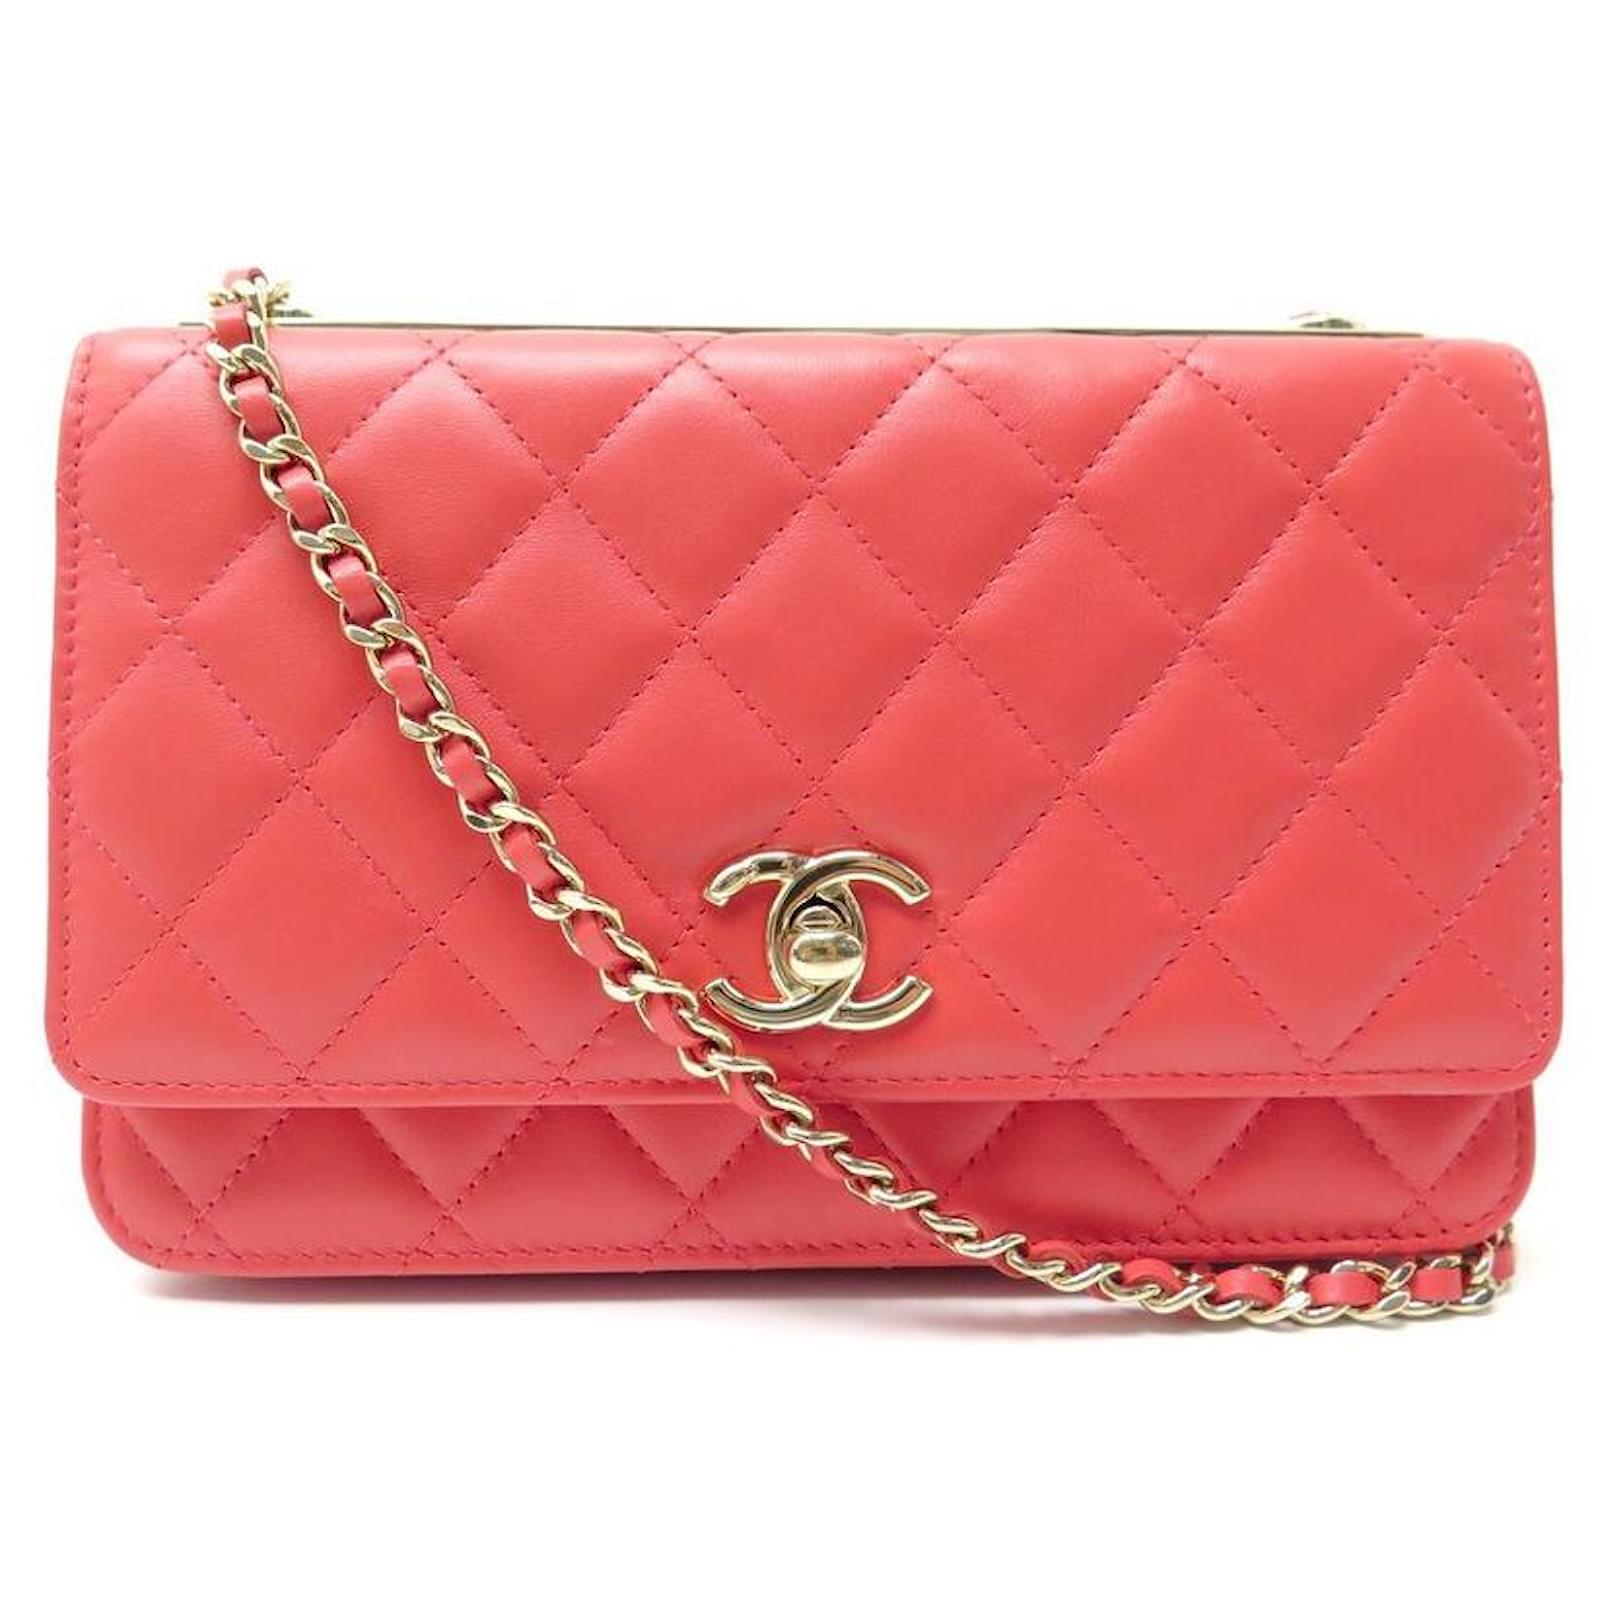 NEW CHANEL WALLET ON CHAIN ED LIMITED HANDBAG PINK LEATHER WOC